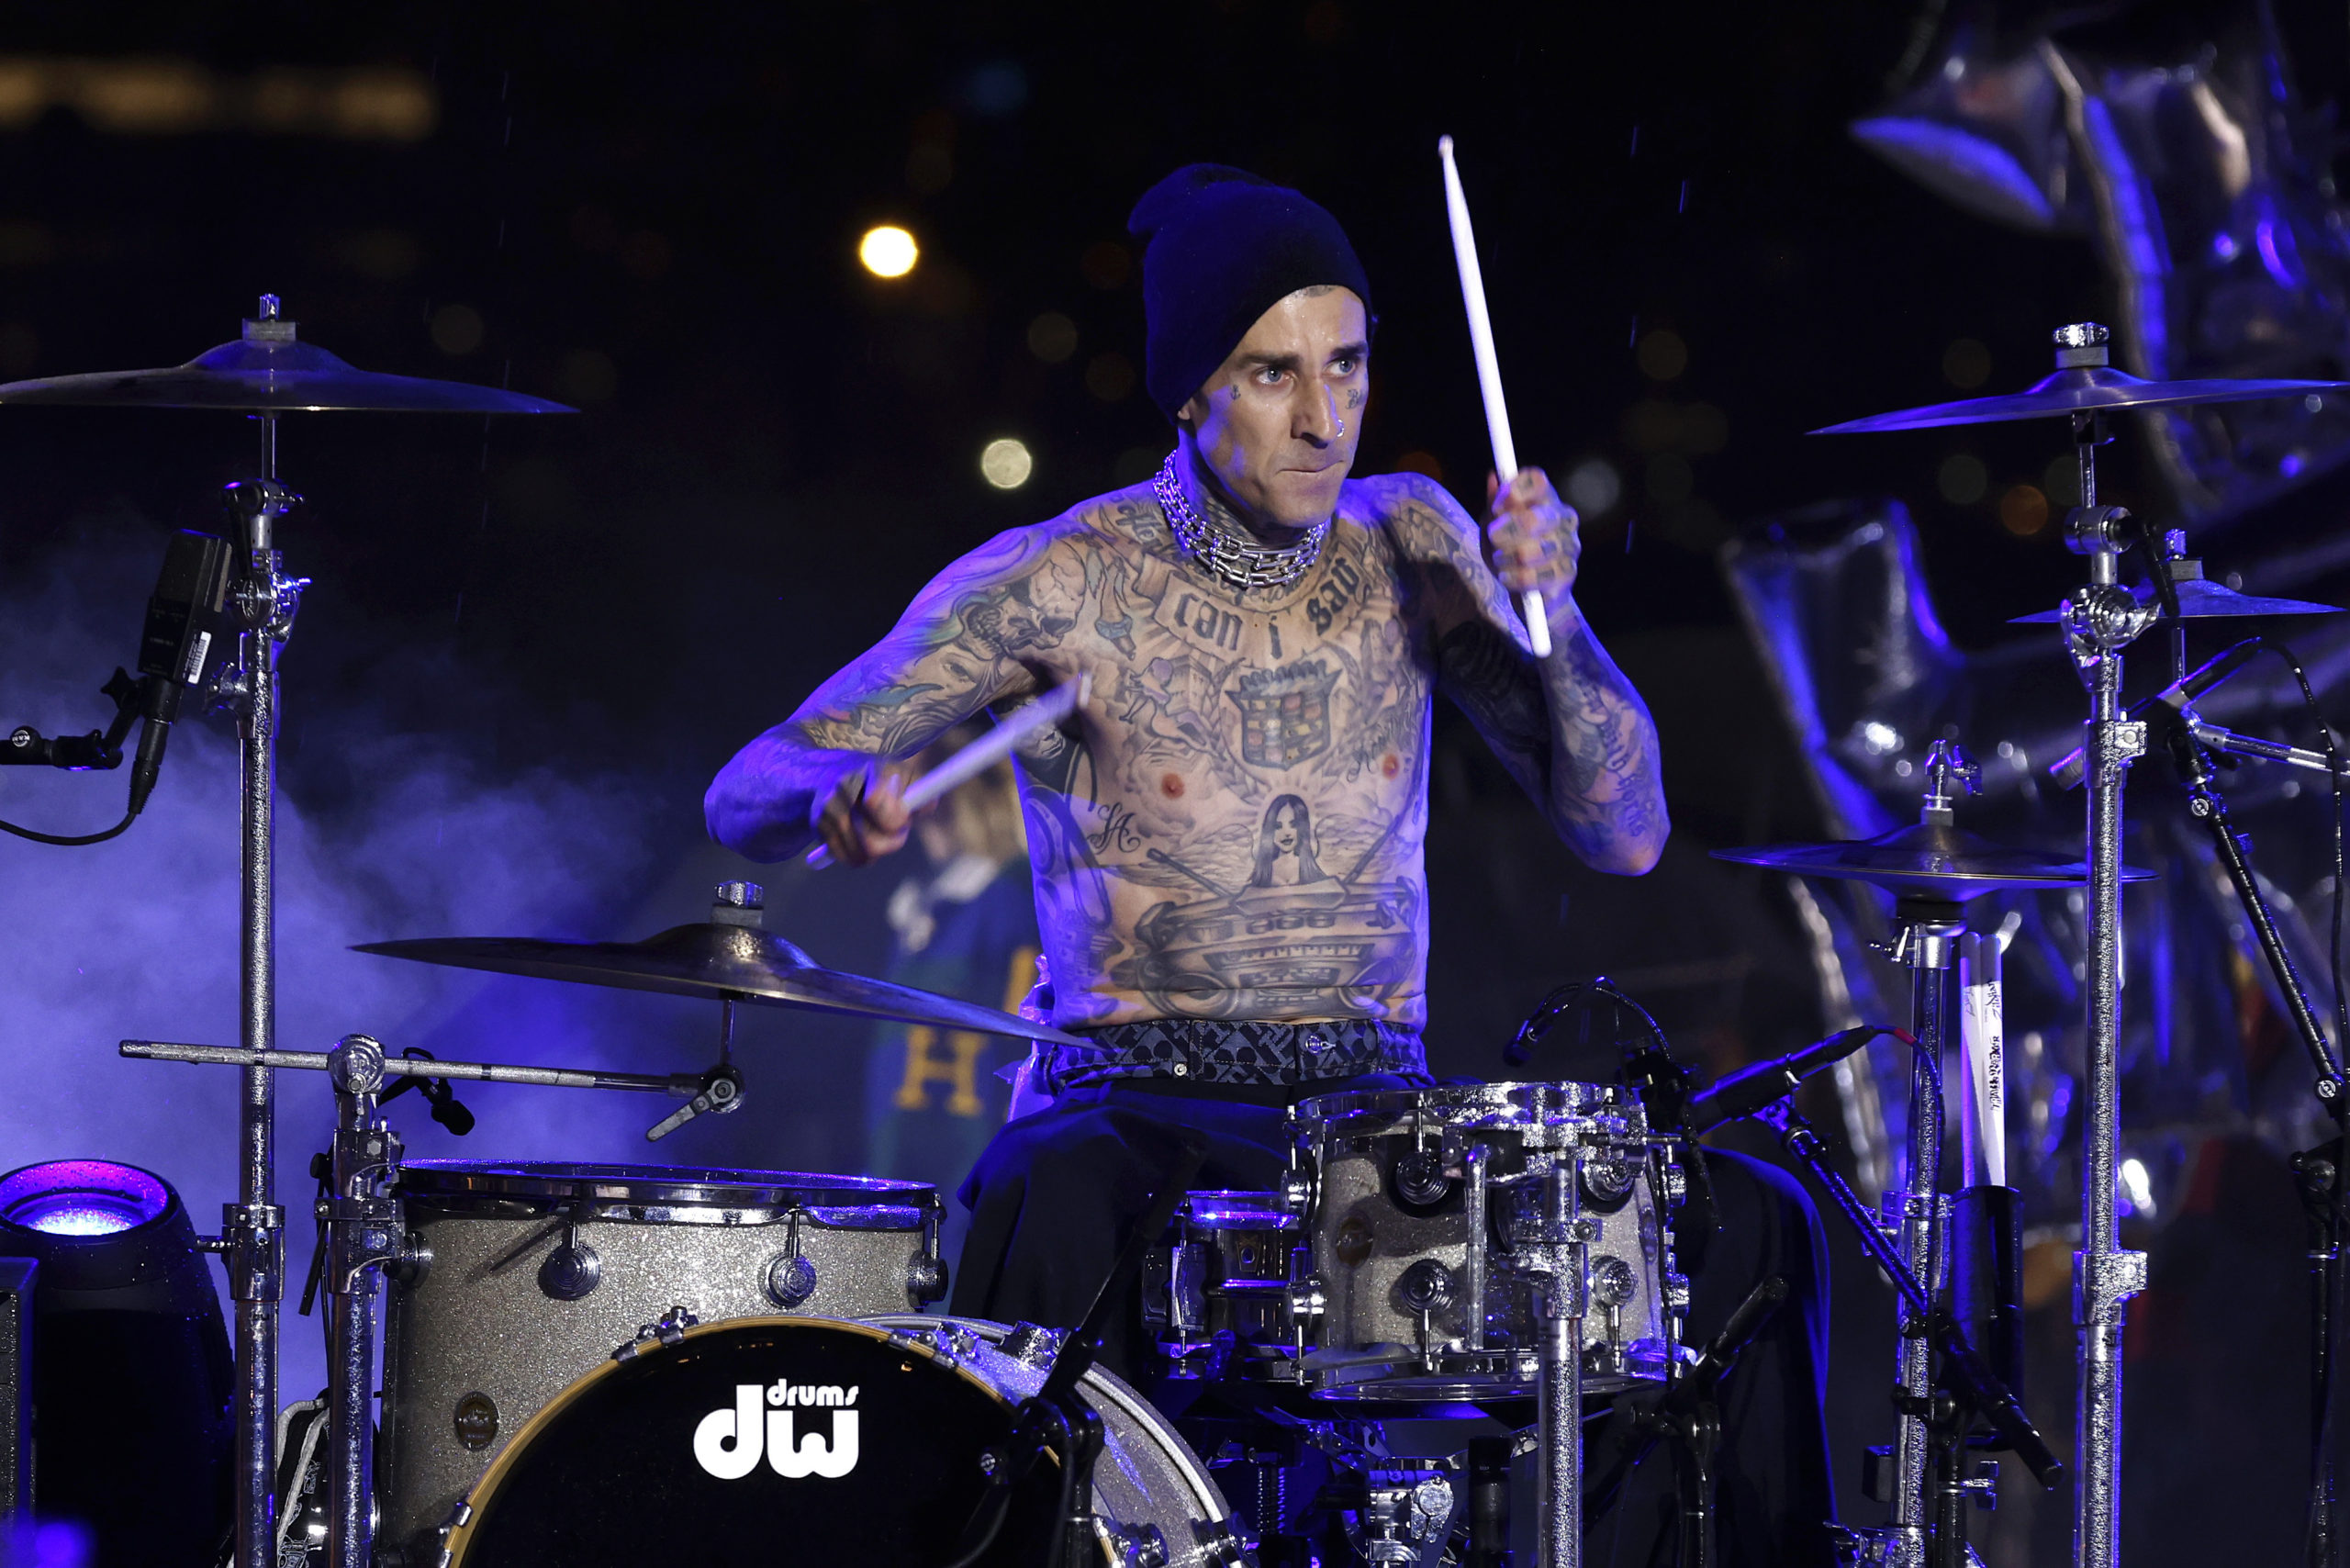 Record flow assembly Tommy Hilfiger closes bold Brooklyn show with Travis Barker on drums